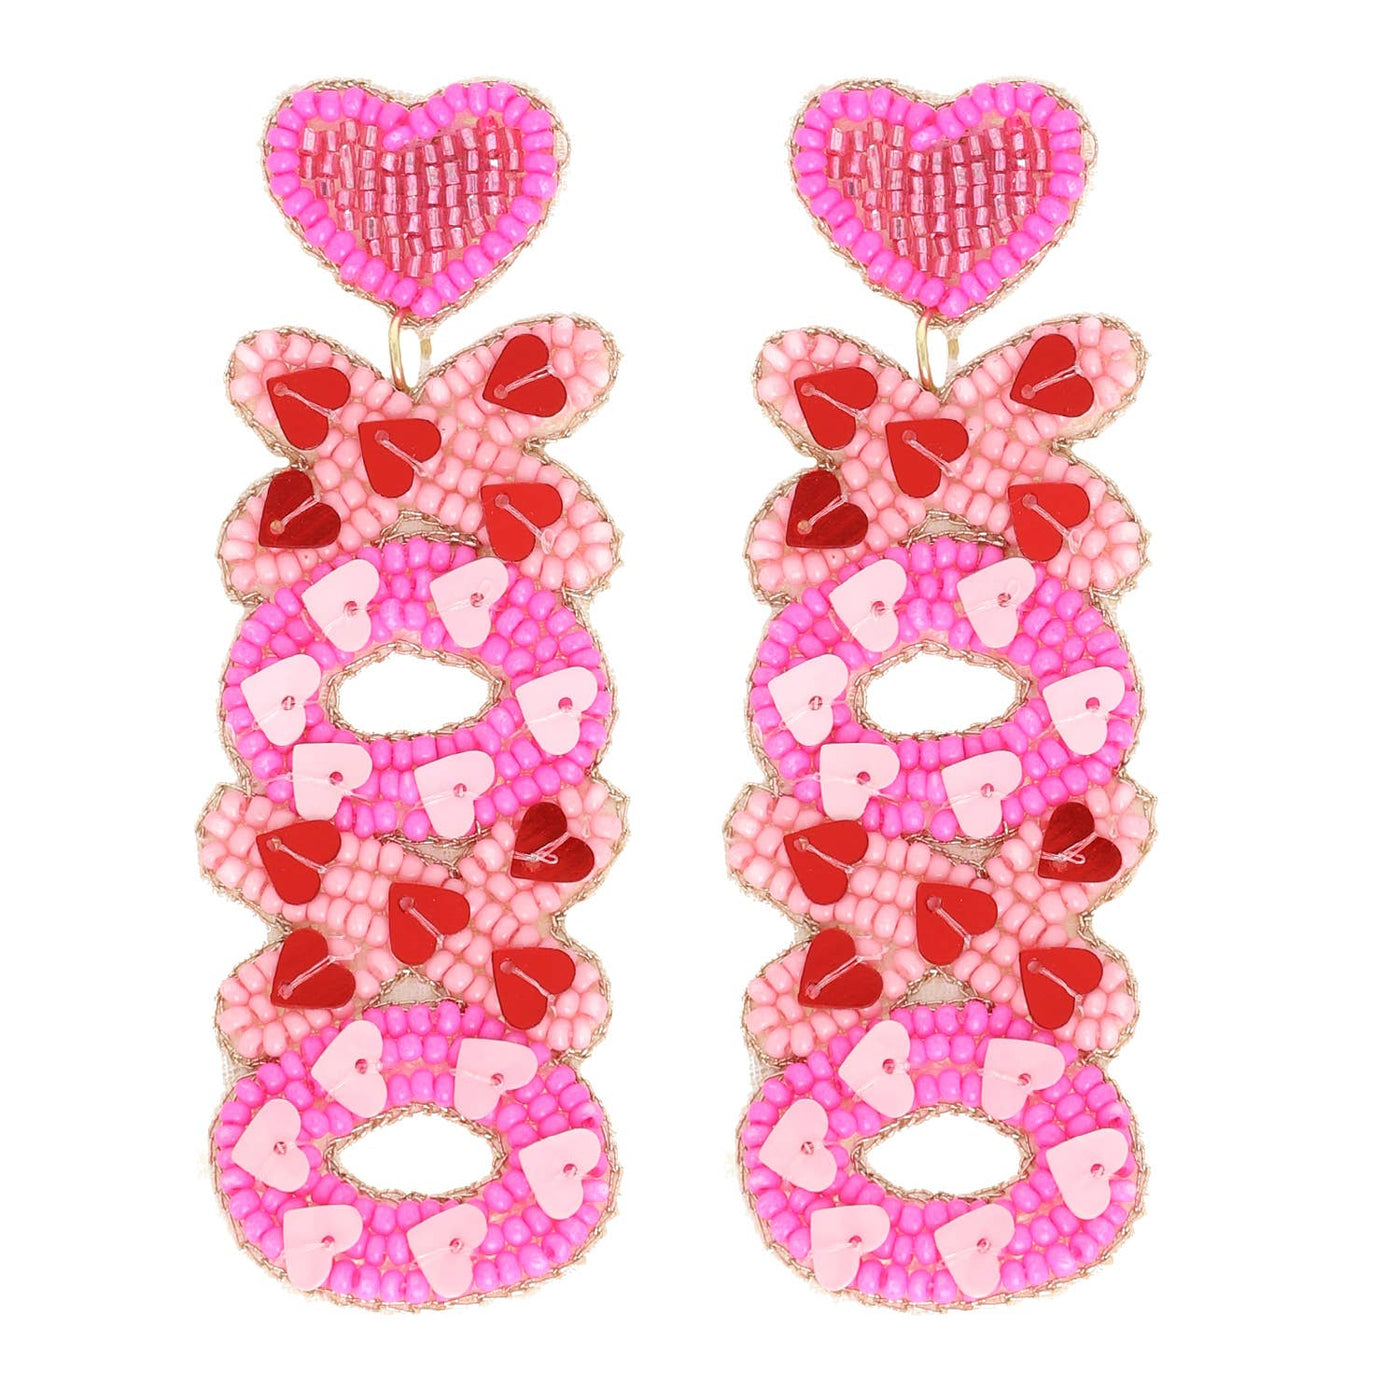 XOXO Beaded Embroidery Valentine Letter Earrings: Pink